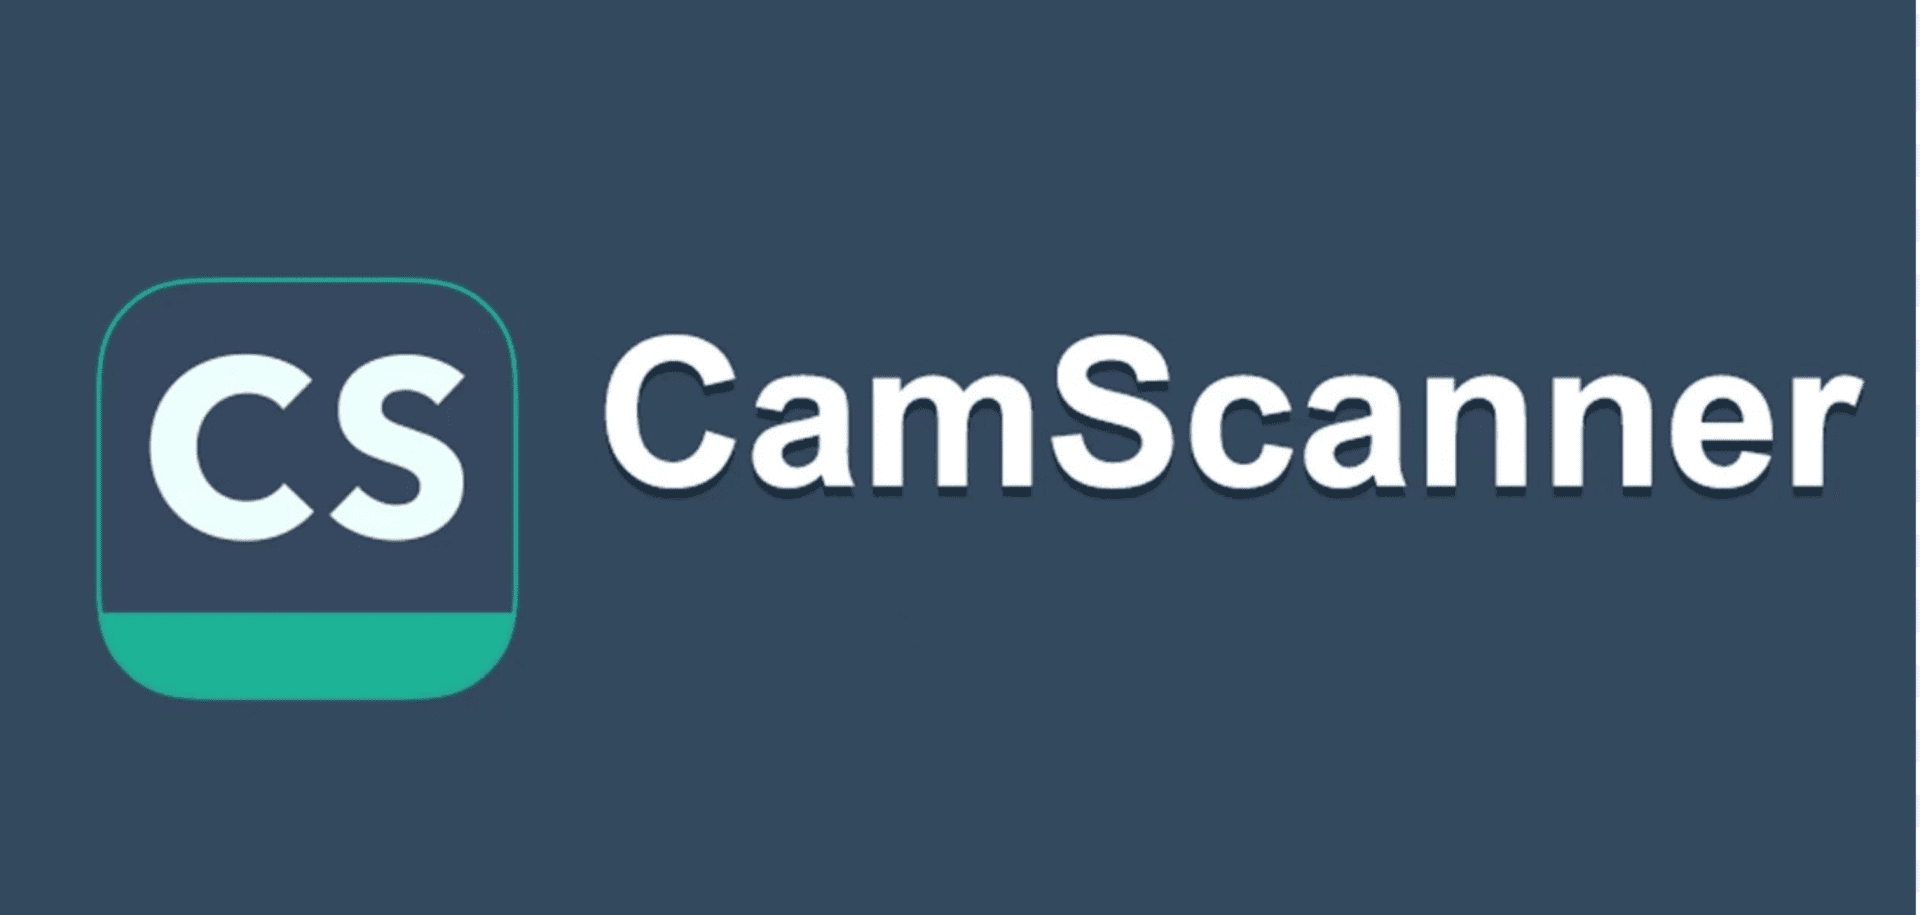 The CamScanner logo on a dark background, representing the CamScanner scanner PDF maker Crack.